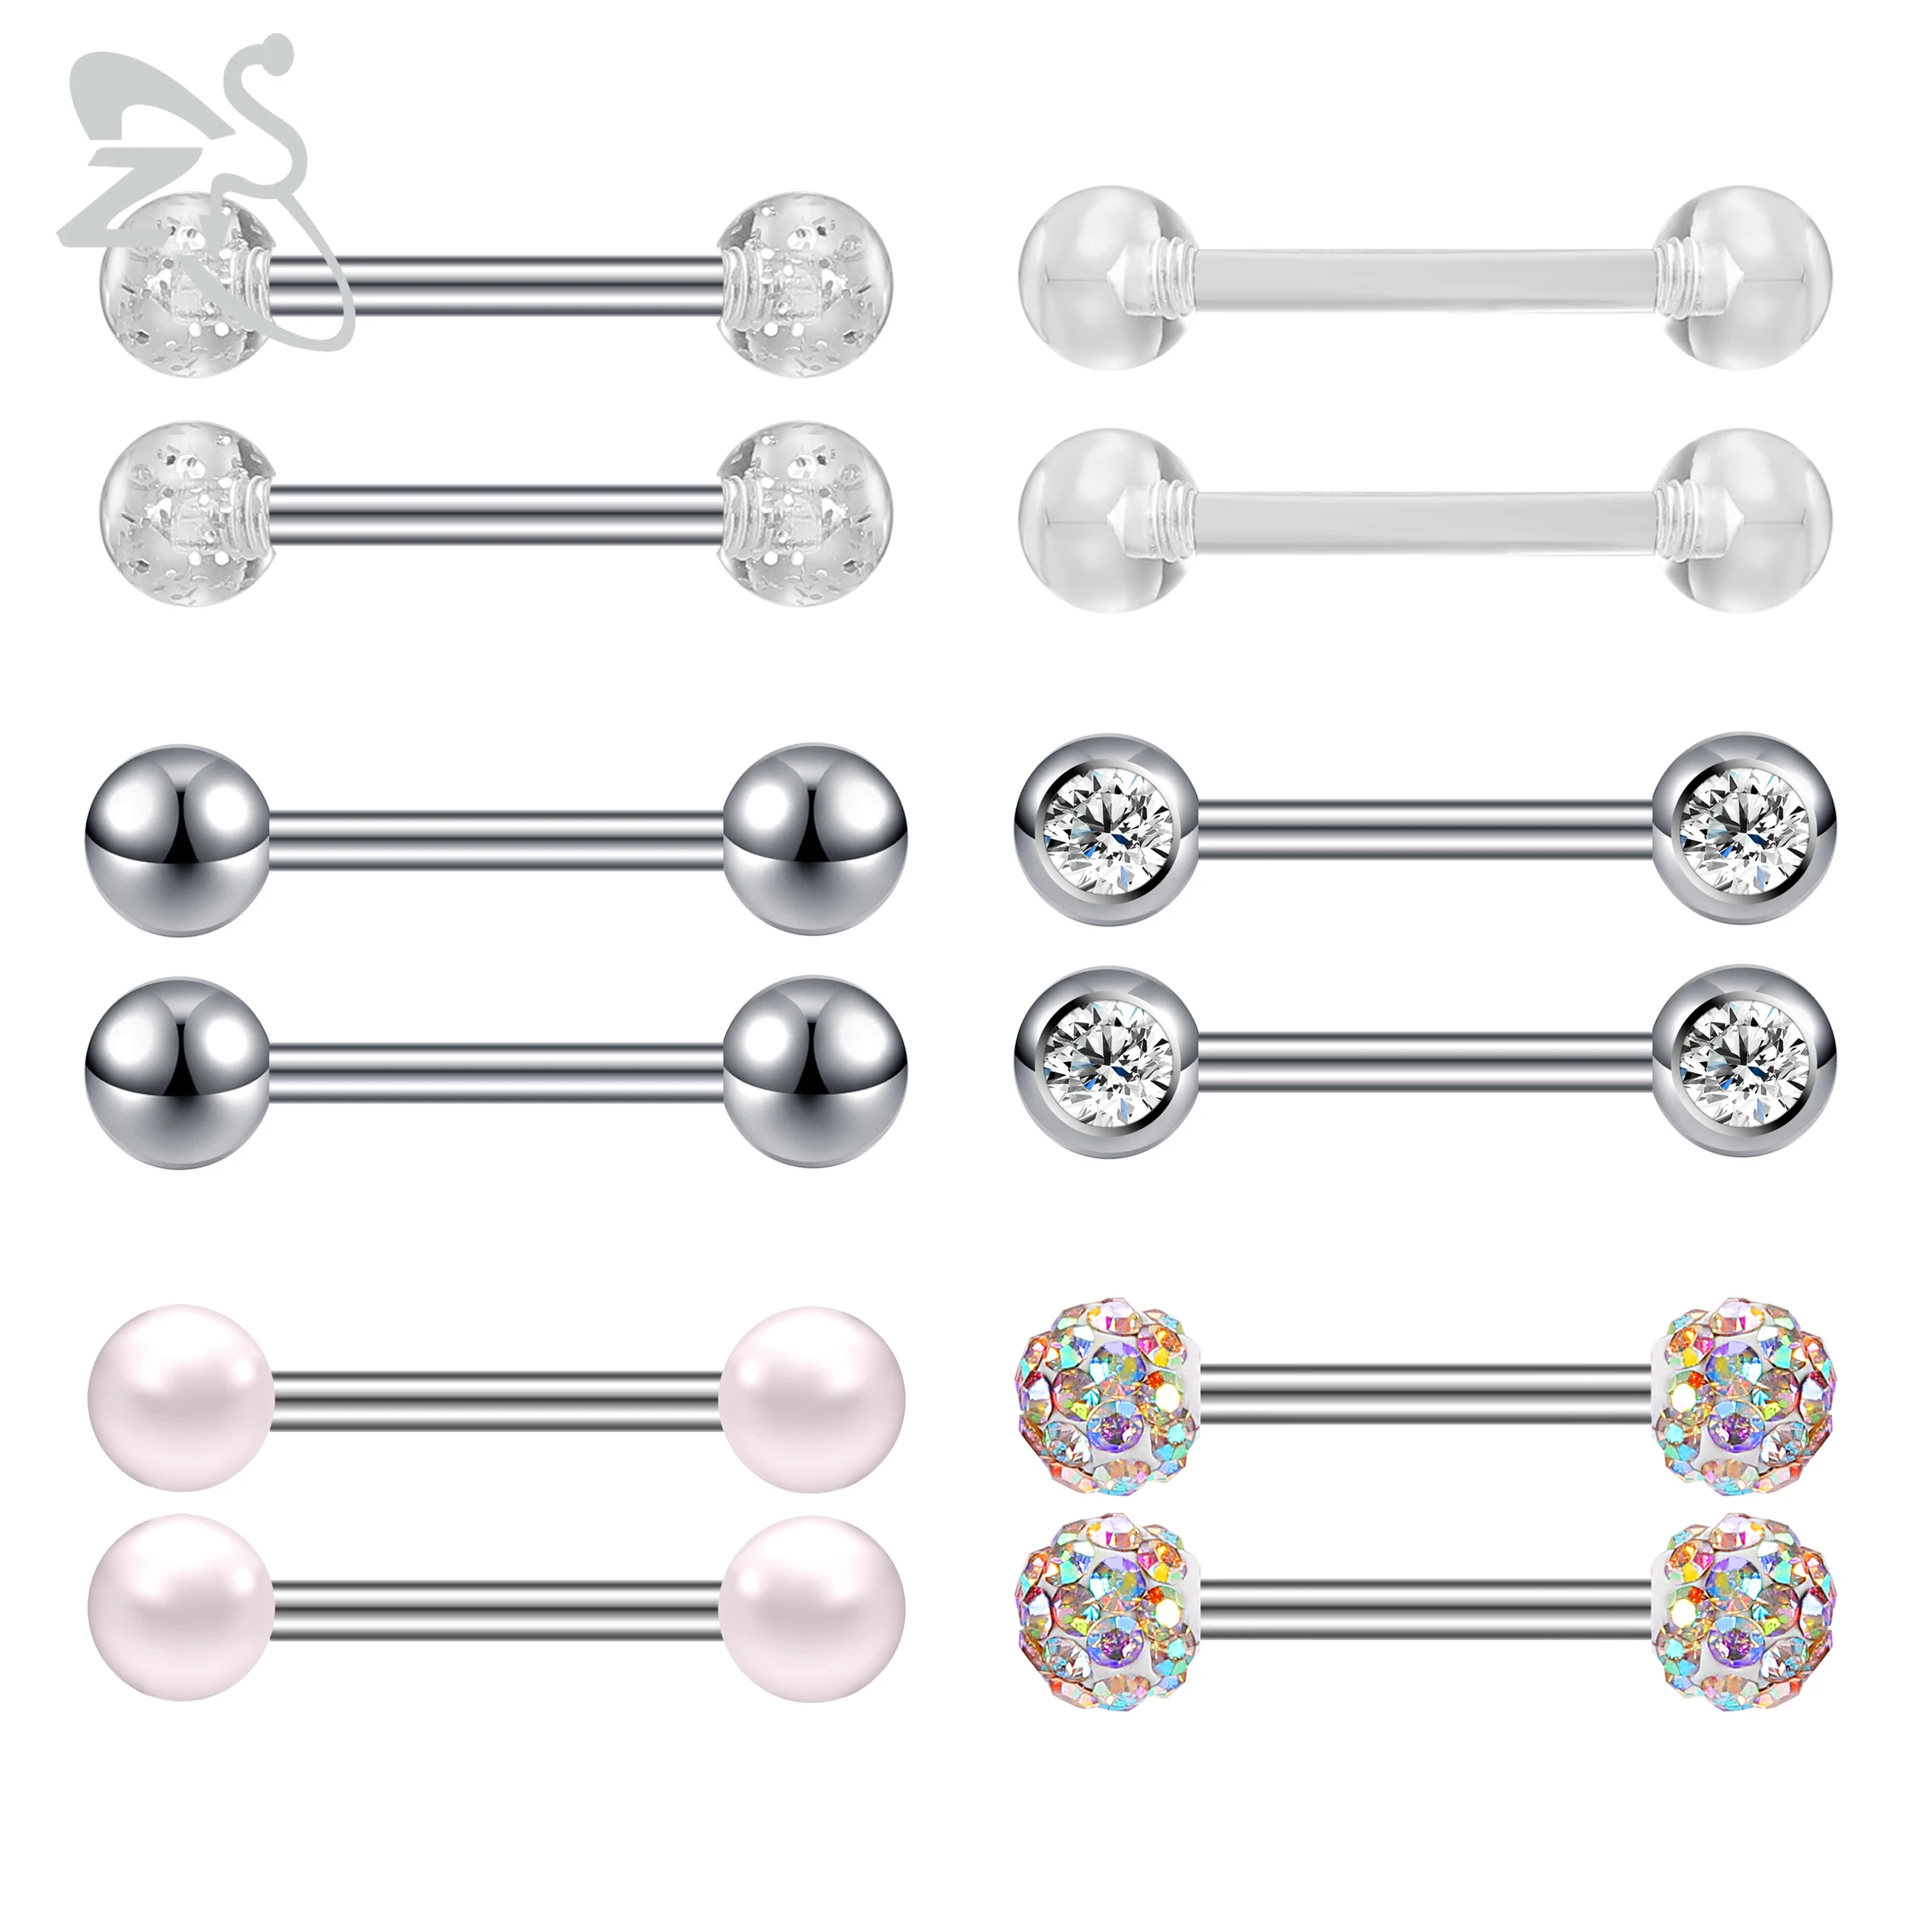 

ZS 12PCS/Lot 316L Stainless Steel Tongue Piercing Set Crystal Barbell Tongue Rings Ear Tragus Helix Piercings Body Jewlery 14G